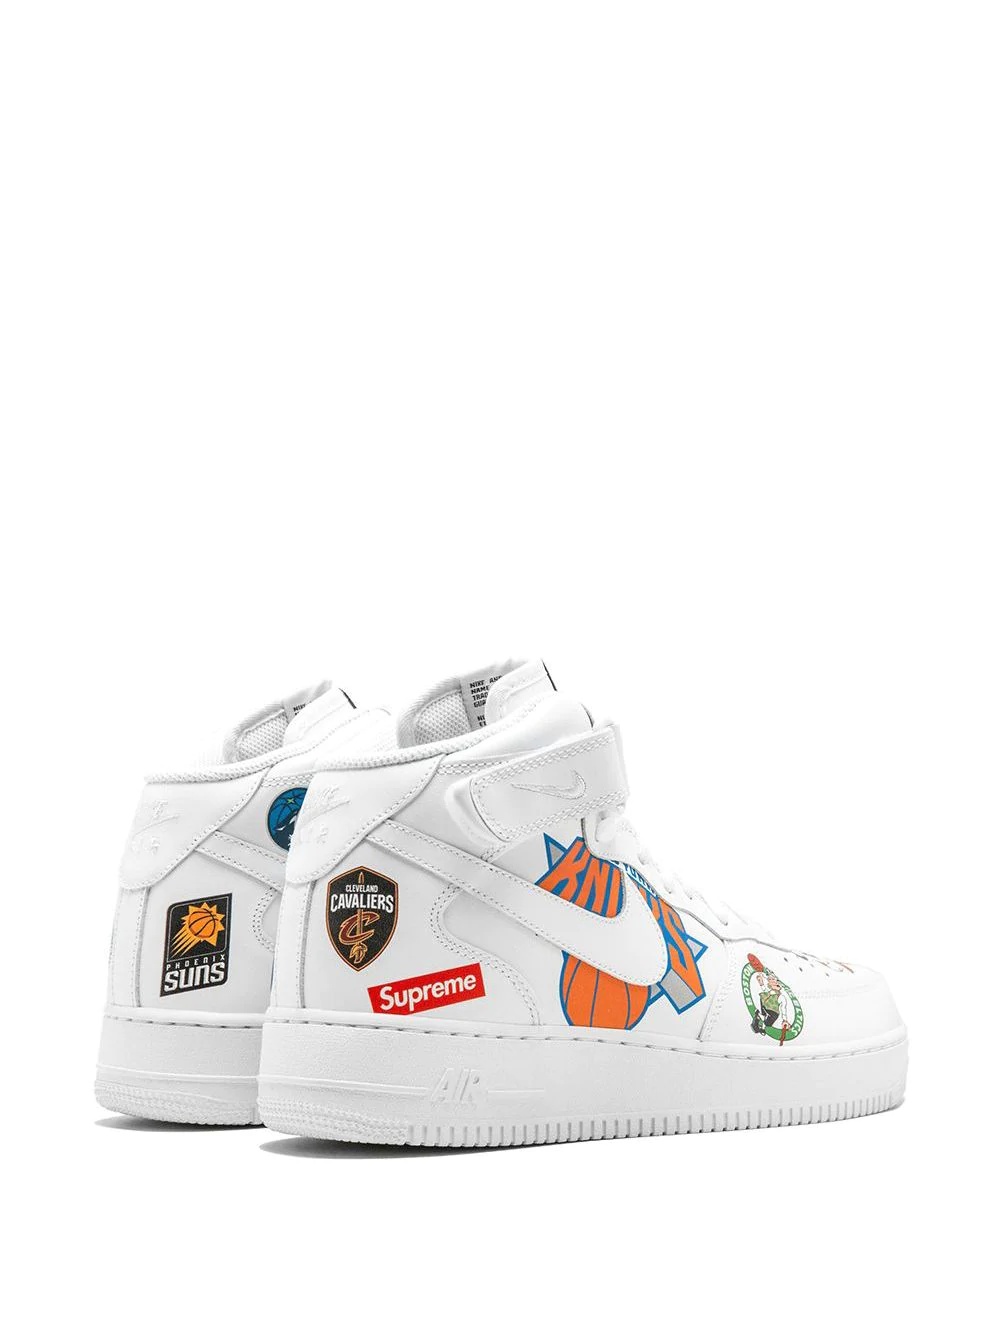 x Supreme x NBA x Air Force 1 MID 07 sneakers - 3